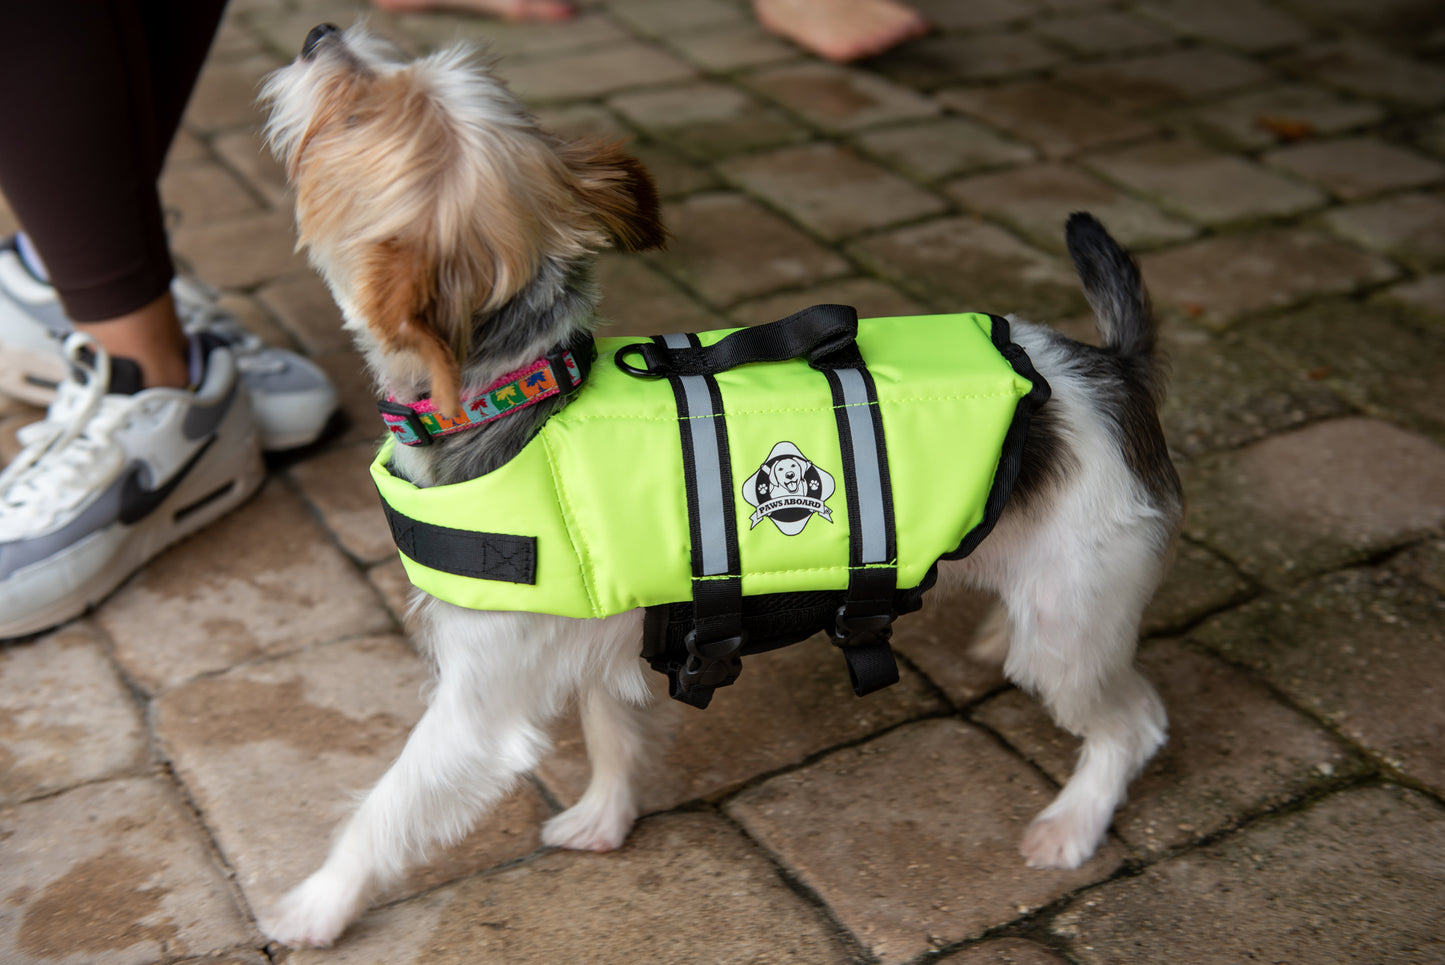 Little Yorkie dog at swimming pool's edge wearing a Safety yellow dog life jacket with breathable mesh underbelly, reflective straps for high visibility, leash clip, and a top handle. Featuring Paws Aboard logo.